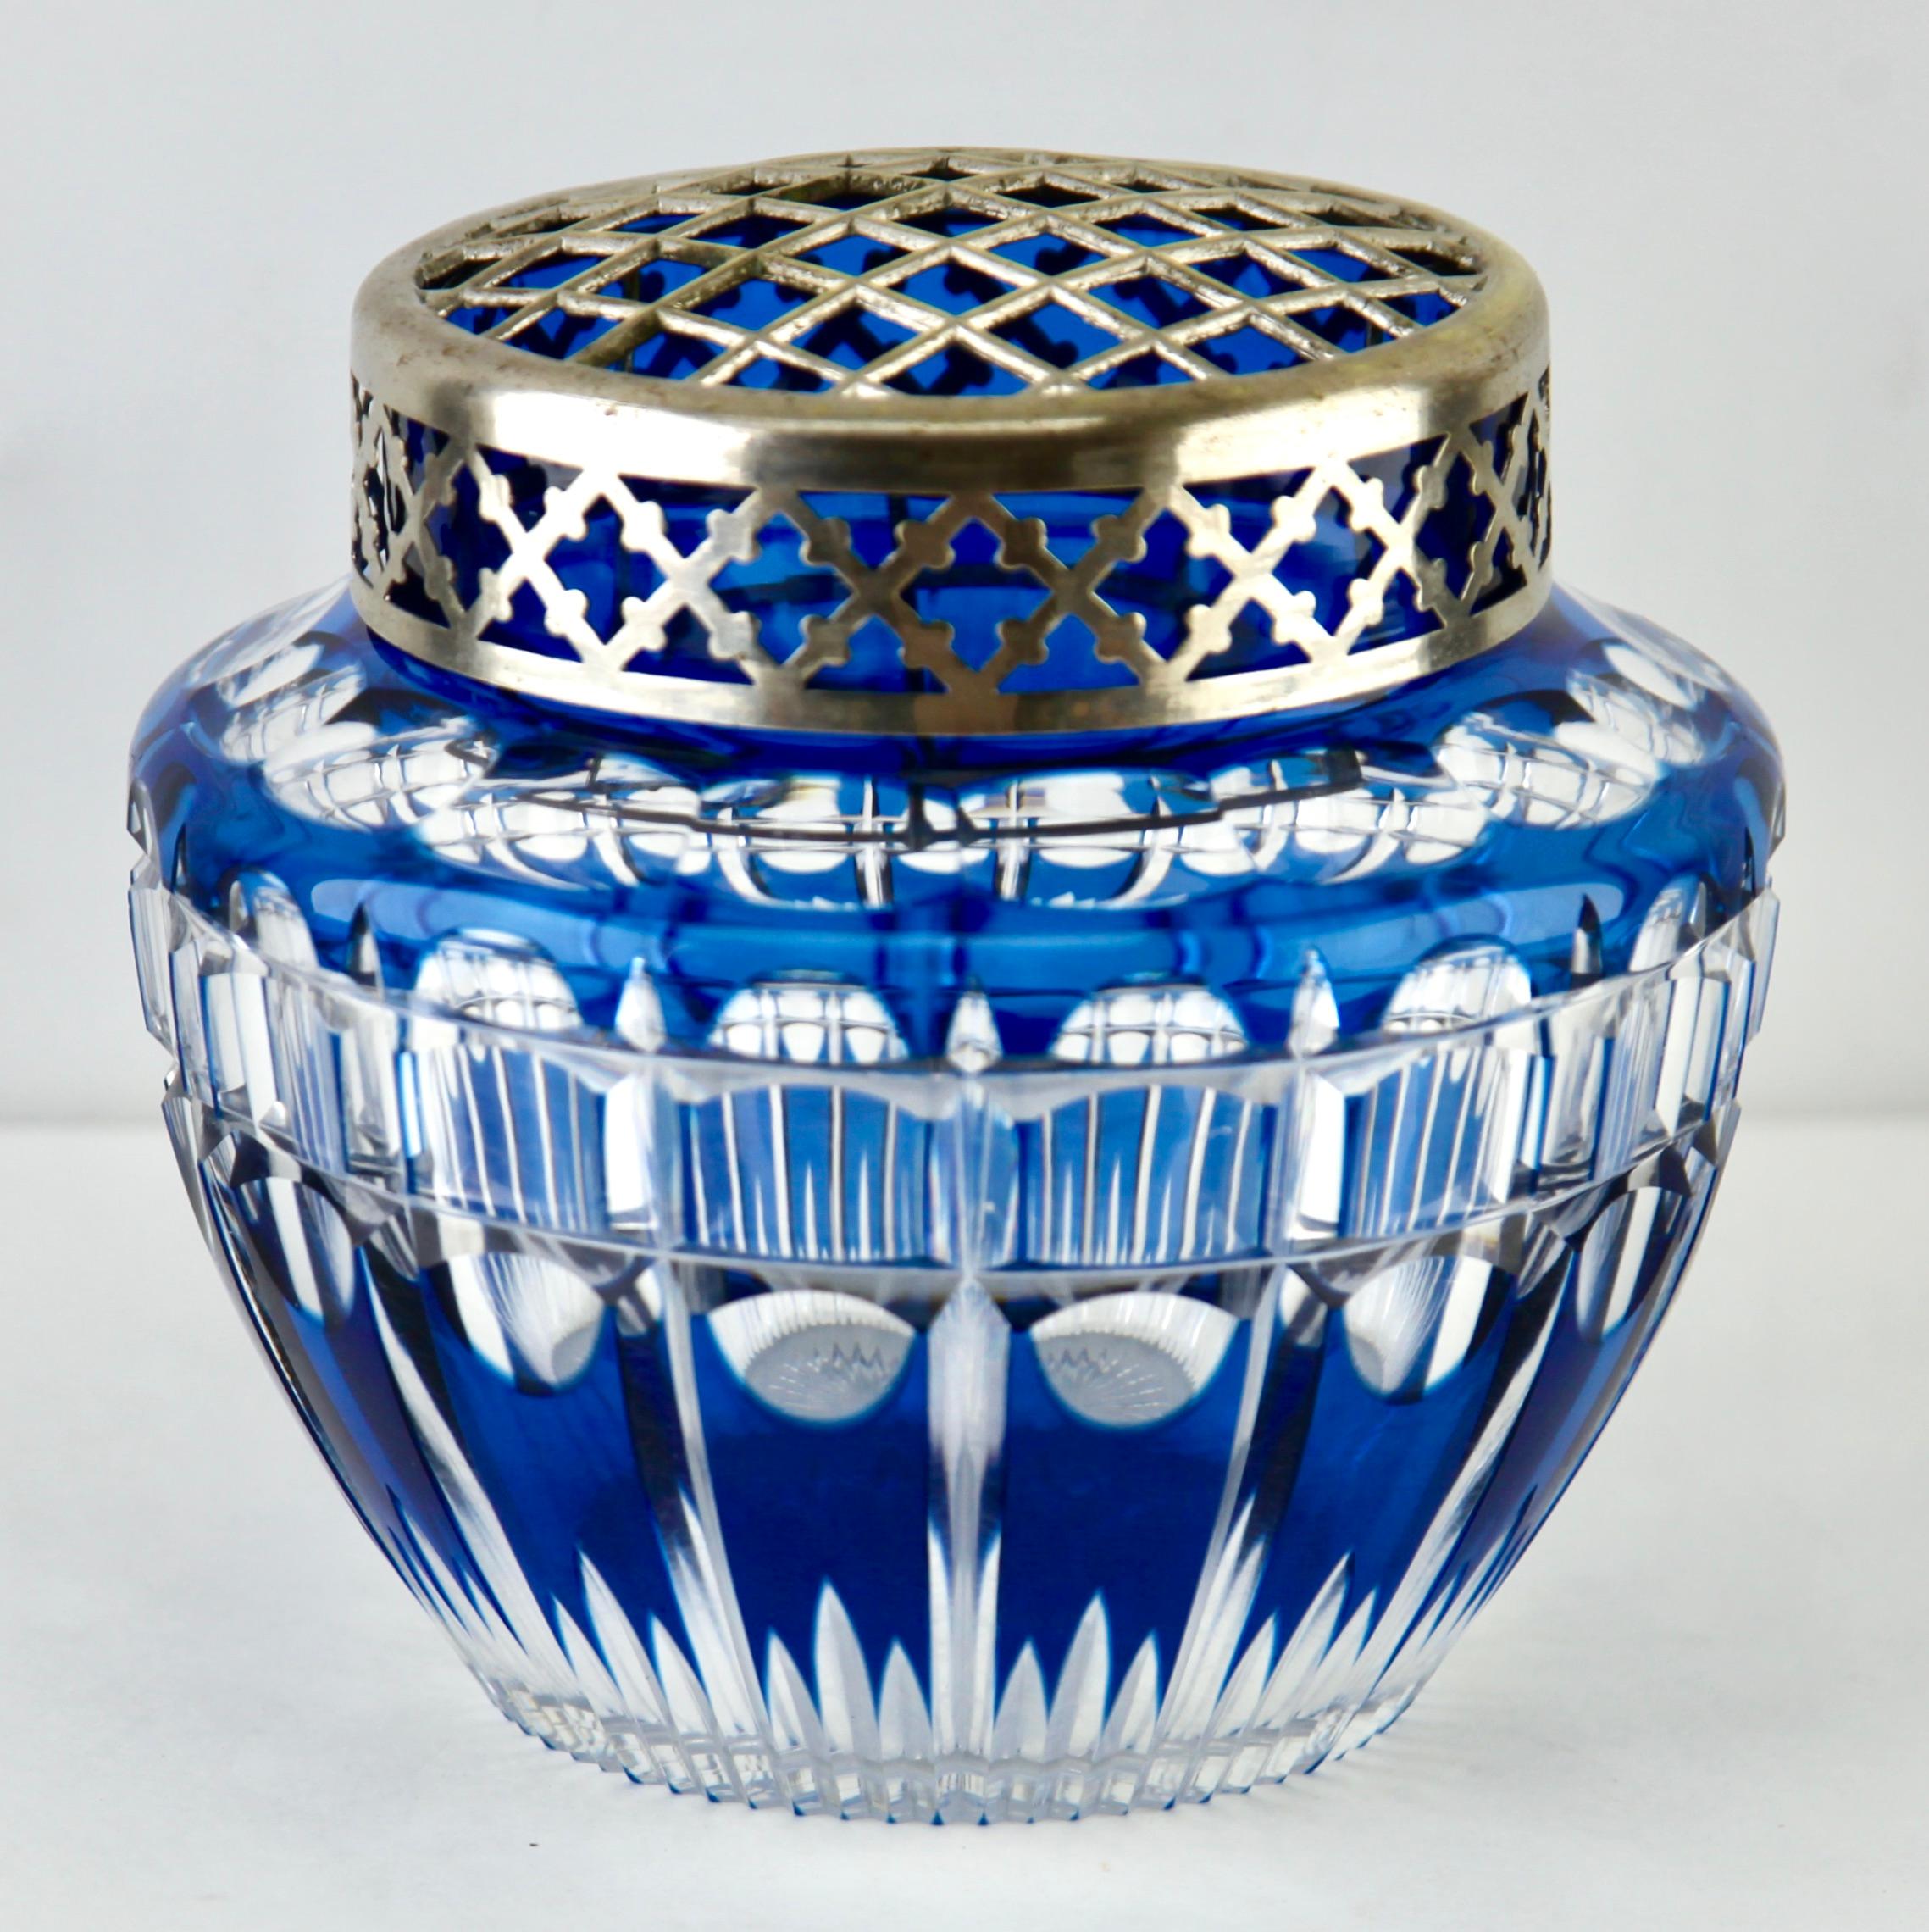 Vibrant, cobalt bleu cased-crystal glass 'Pique Fleurs' vase with a cut-to-clear Art Deco decoration
This design for vases is often called 'Pique fleurs' or 'rose-bowl' and is supplied with a fitted crystal grille to support stems in an